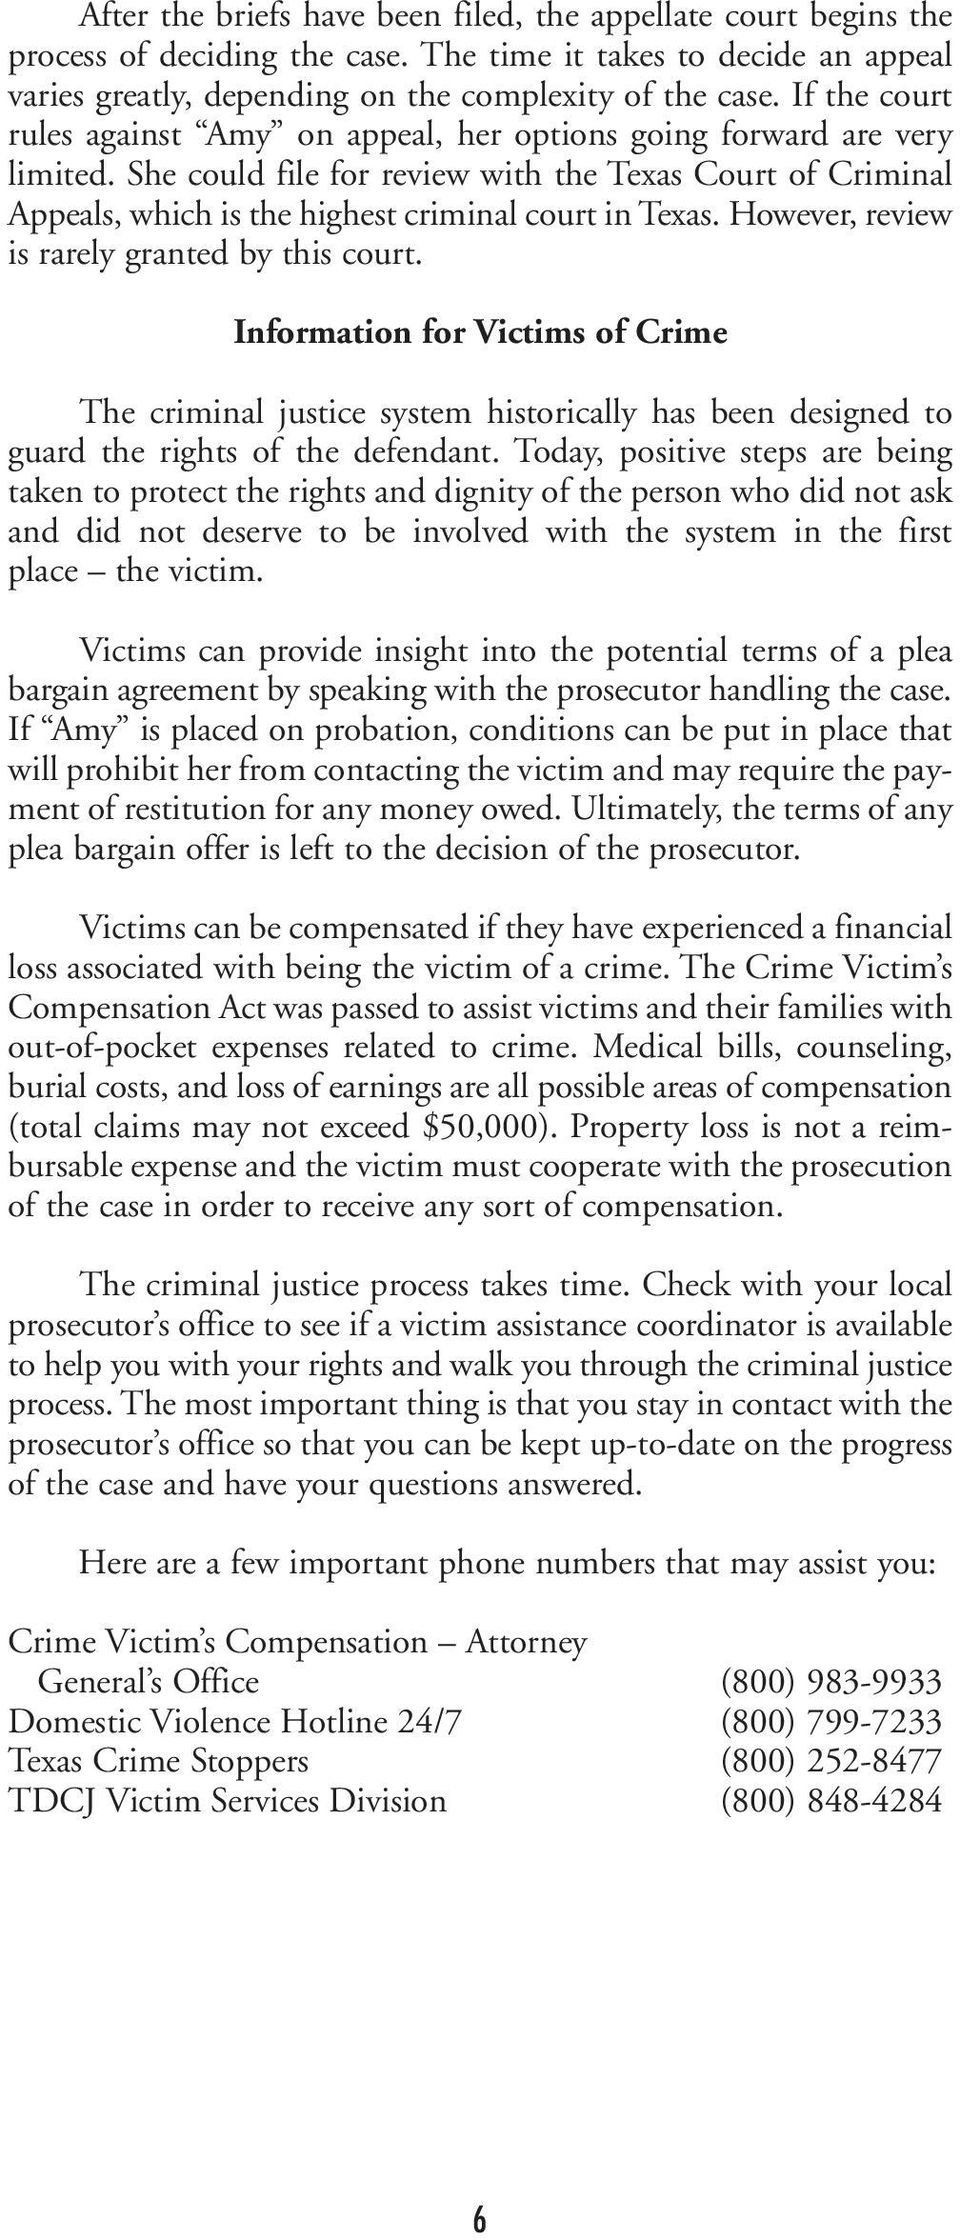 However, review is rarely granted by this court. Information for Victims of Crime The criminal justice system historically has been designed to guard the rights of the defendant.